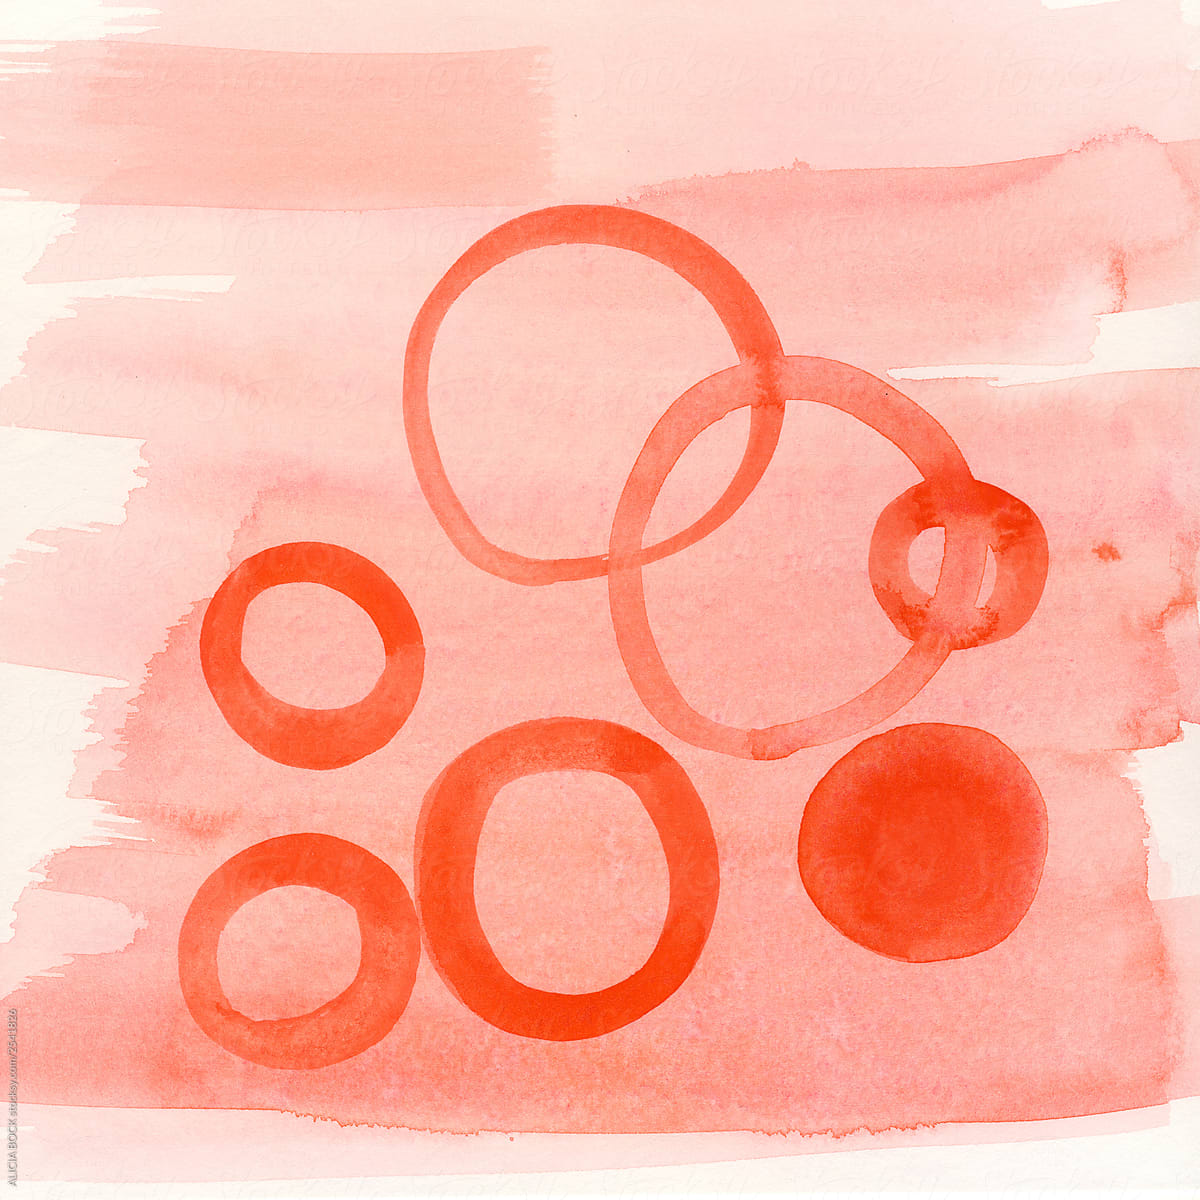 Abstract Watercolor Painting Of Overlapping Circles